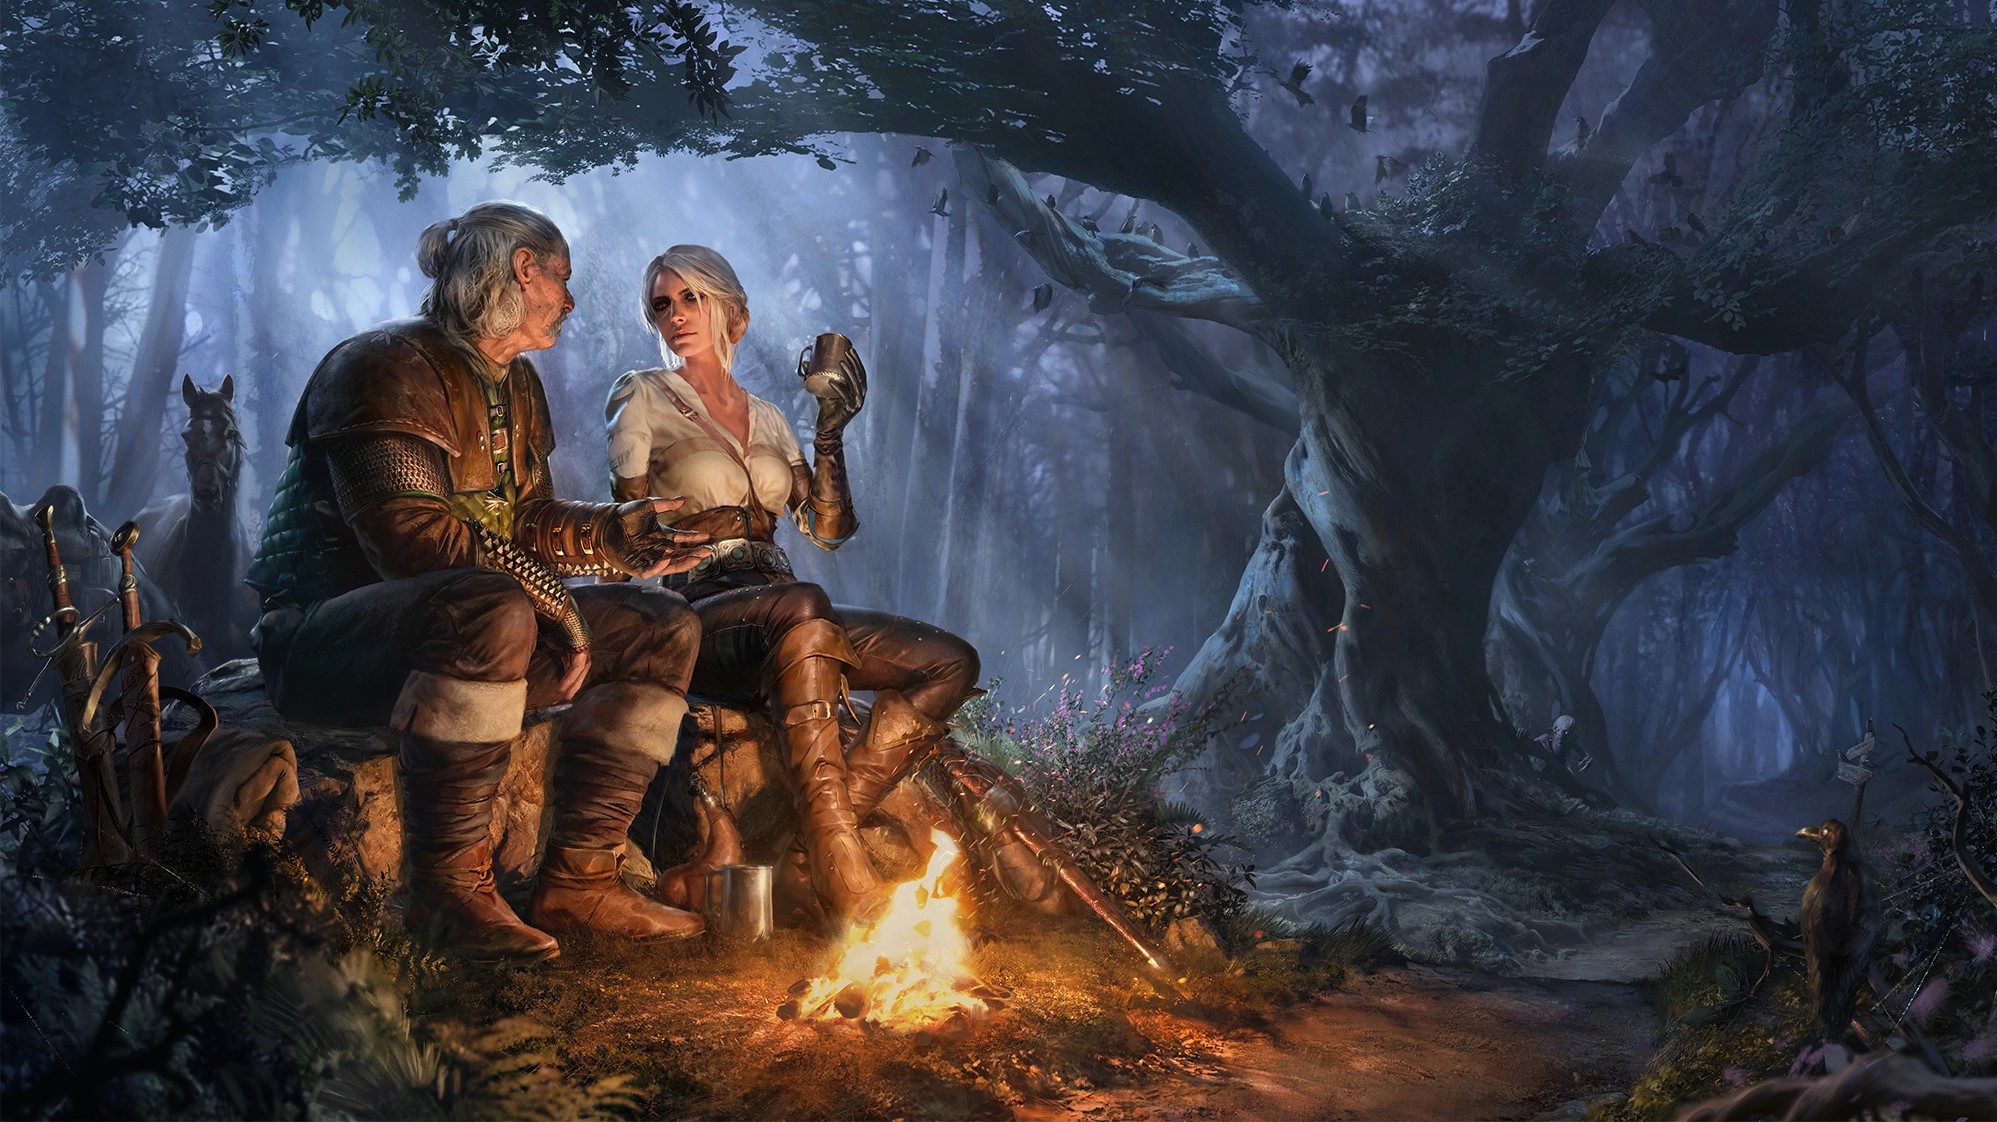 The Witcher 3: Wild Hunt Story Guide + All Quotes in Game - ✔Instructive Quotes✔ - 57BDC4A